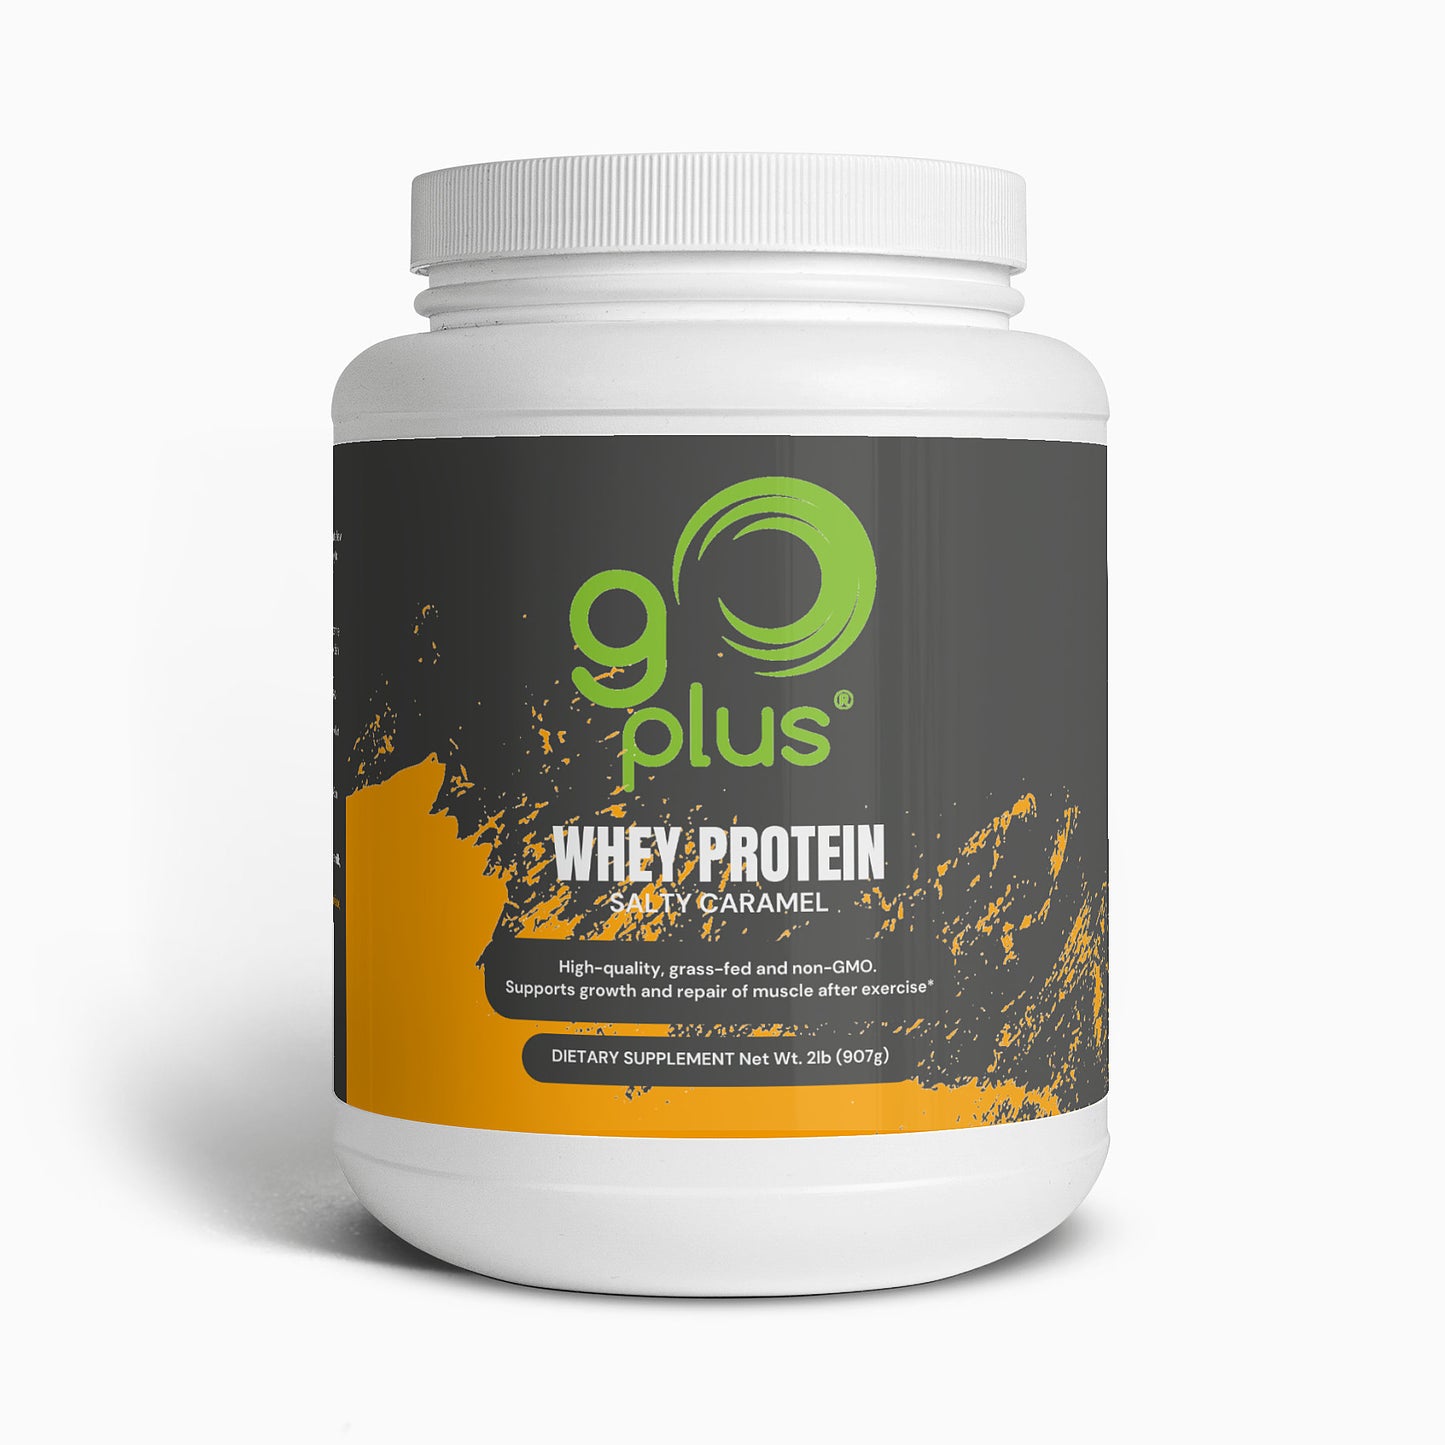 Whey Protein (Salty Caramel Flavour) 2 lb Go Plus Vitamins & Supplements